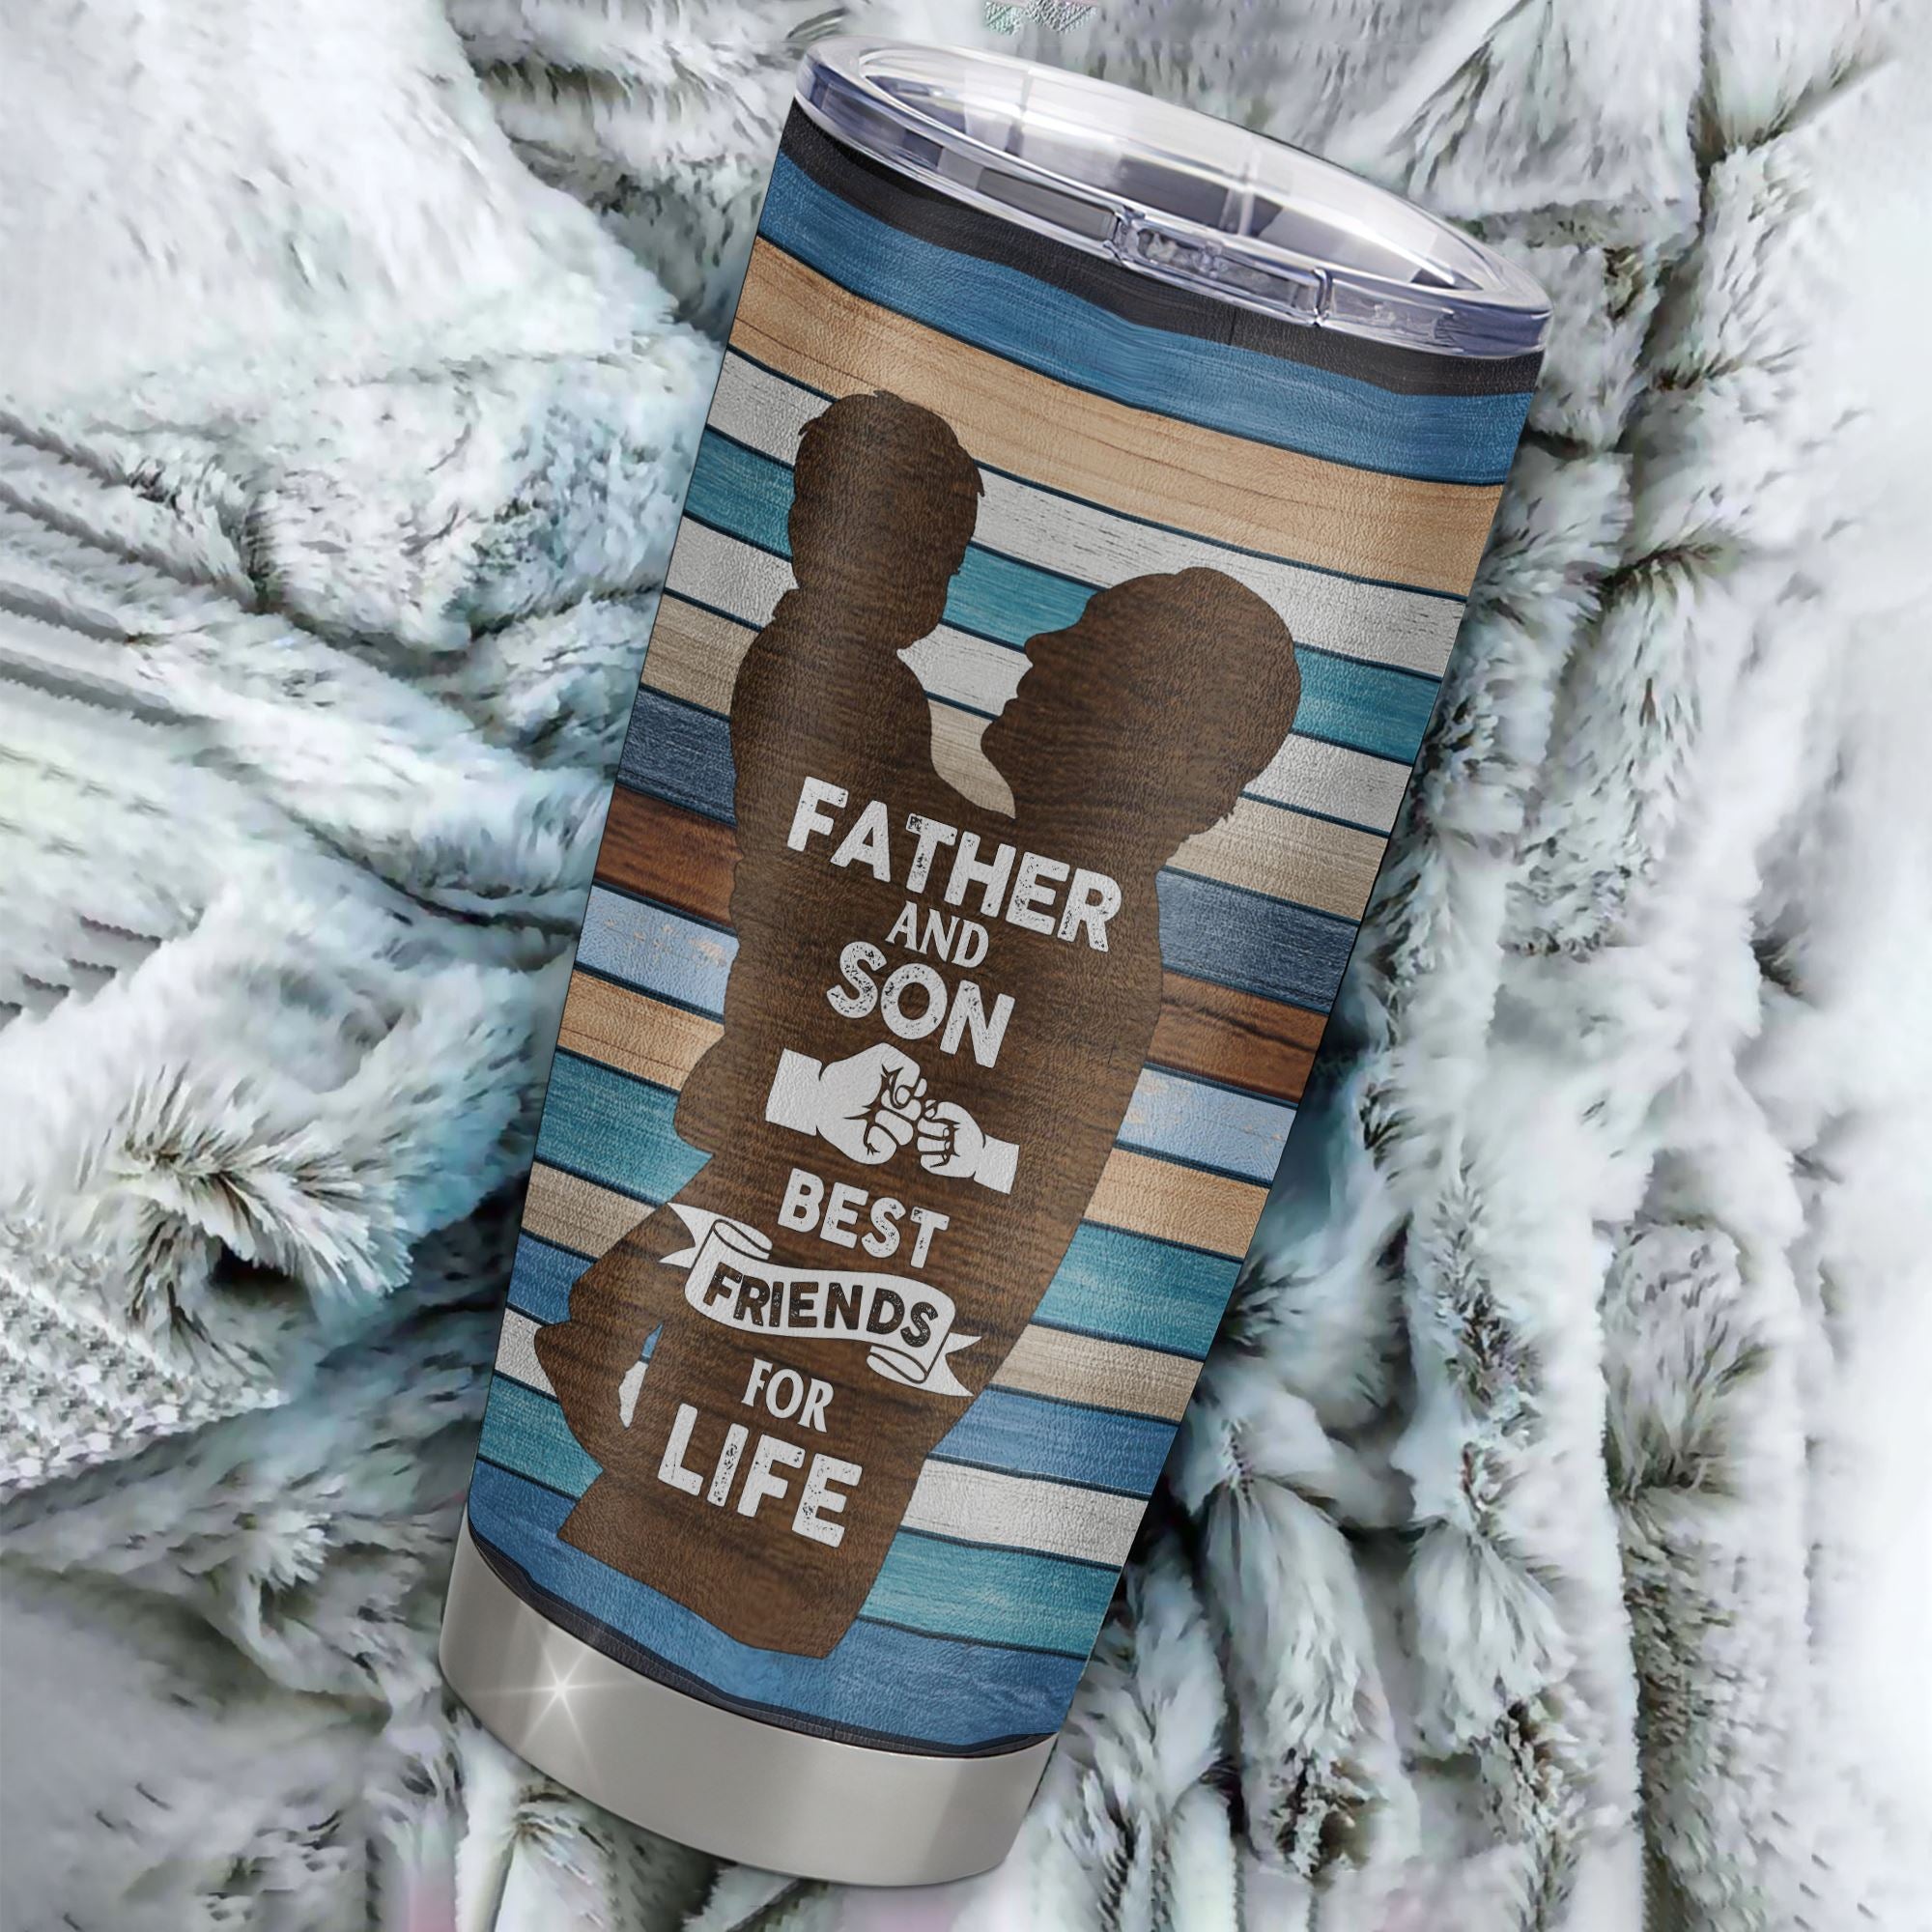 Legend Husband Daddy Grandpa, Personalized Tumbler Cup, Father's Day Custom  Gifts